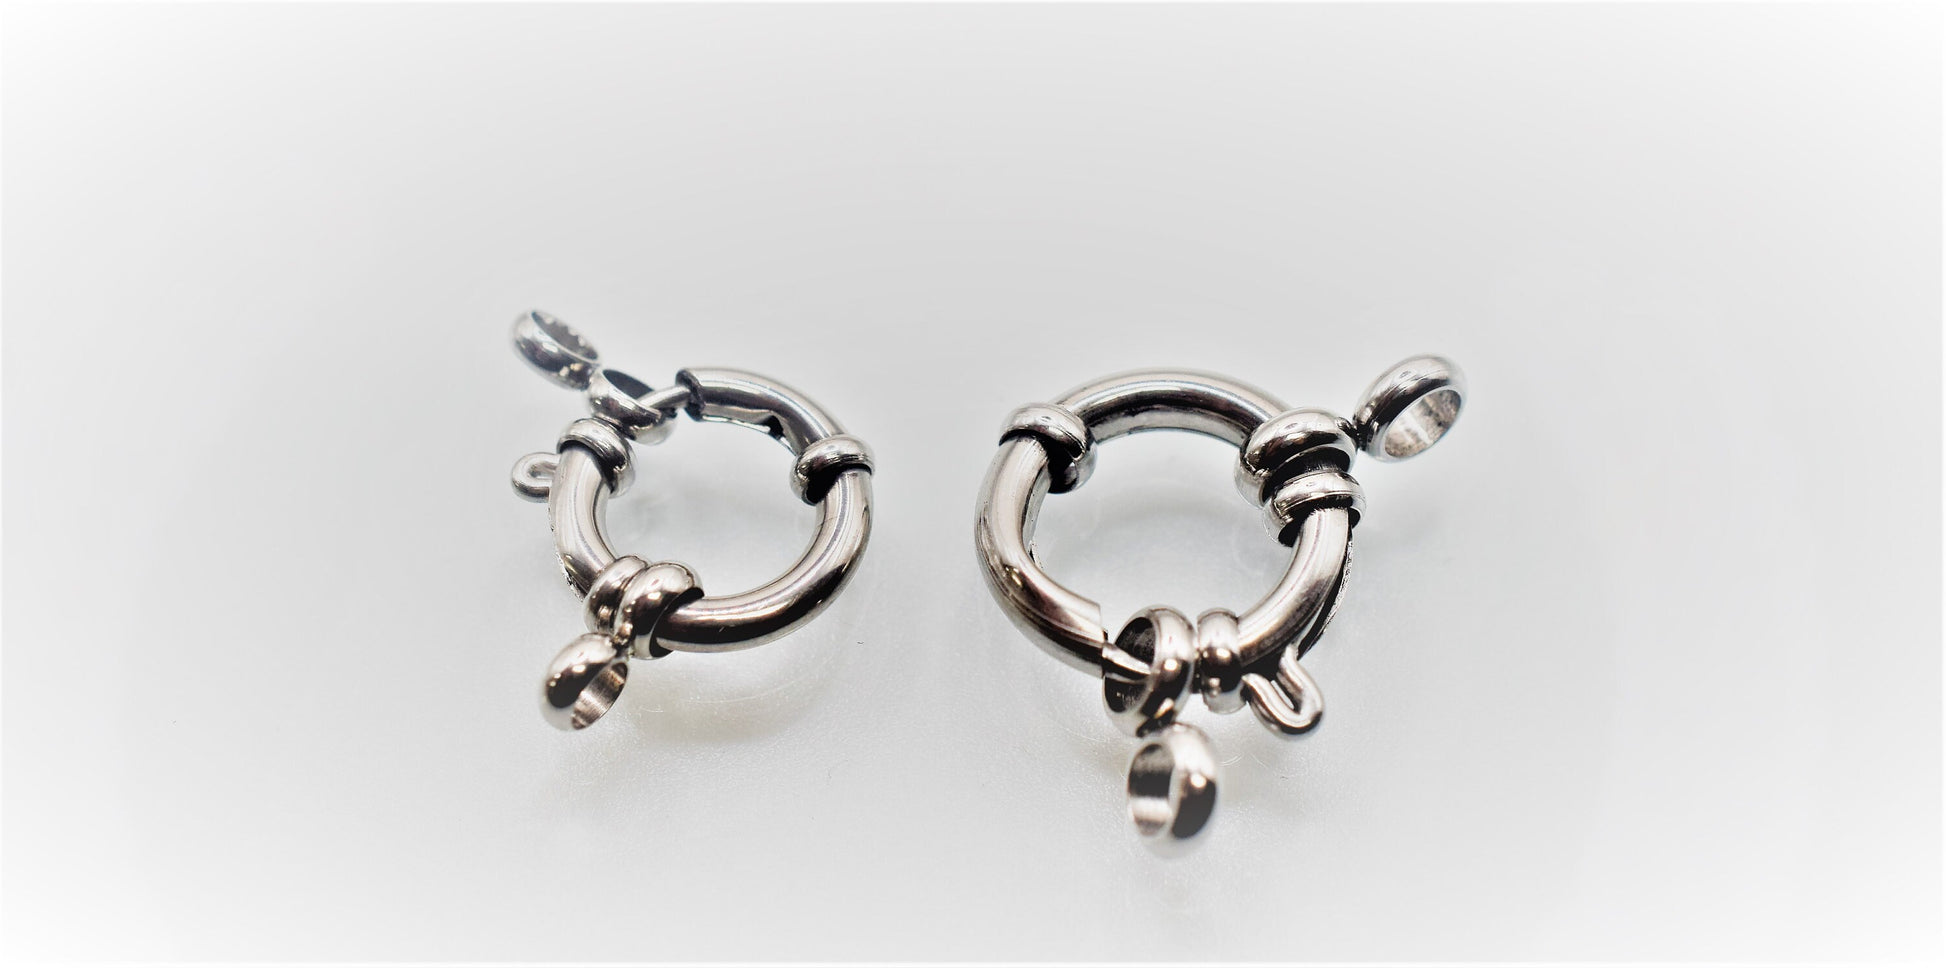 hypoallergenic Stainless Steel Clasp Toggle/SpringRing for Jewelry Findings and Supplies Parts For Jewelry 12mm/14mm